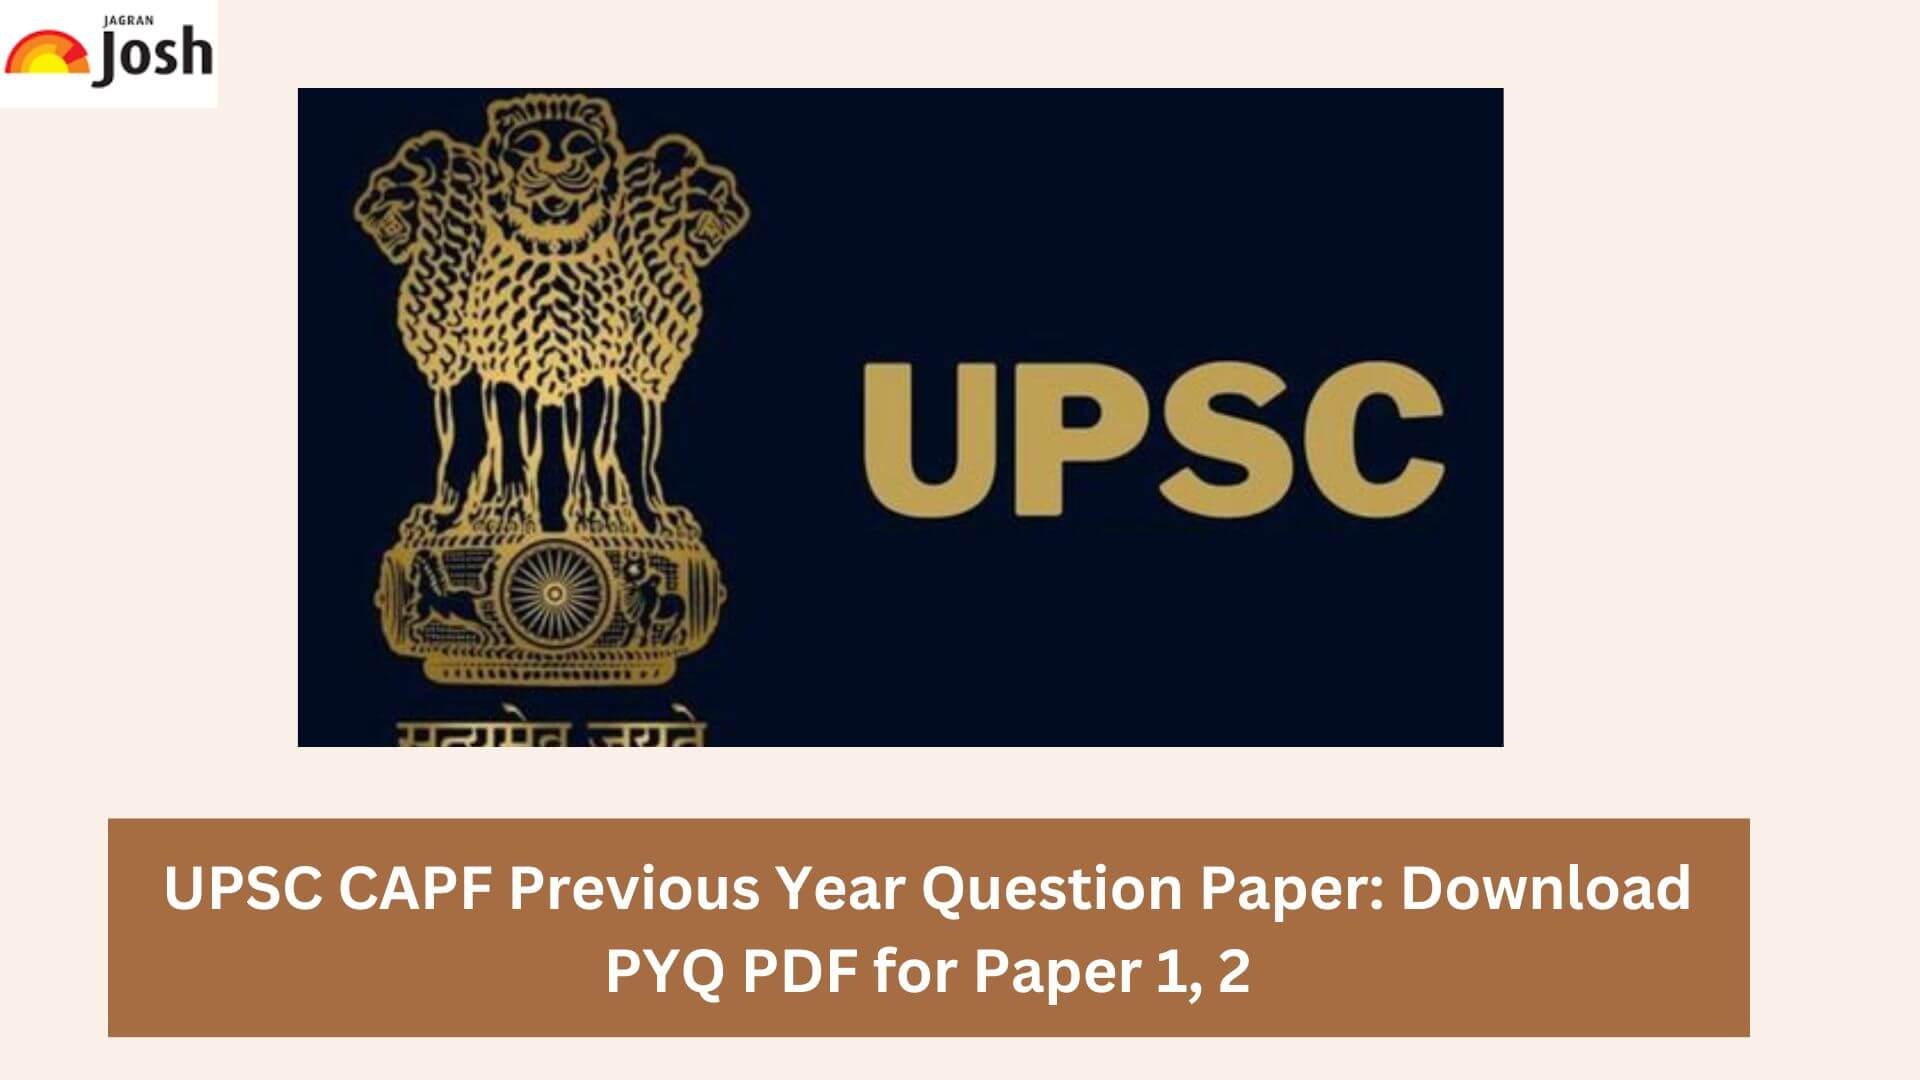 UPSC CAPF Previous Year Paper, Download Question Paper PDF for Paper 1, 2